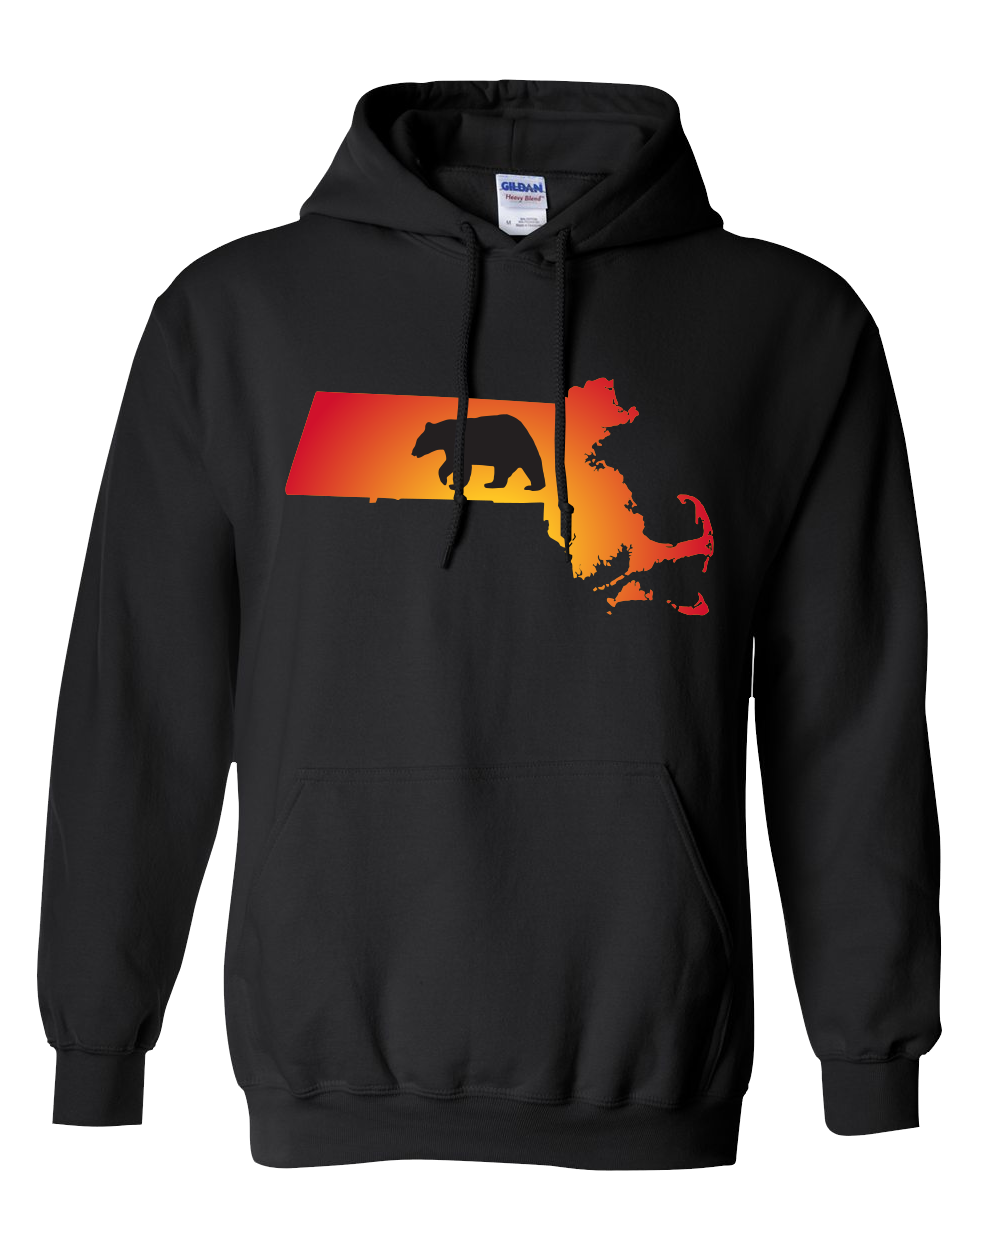 Pullover Hooded Sweatshirt Massachusetts Black Black Bear Vibrant Design High Quality Tight Knit Ring Spun Low Maintenance Cotton Printed With The Newest Available Color Transfer Technology